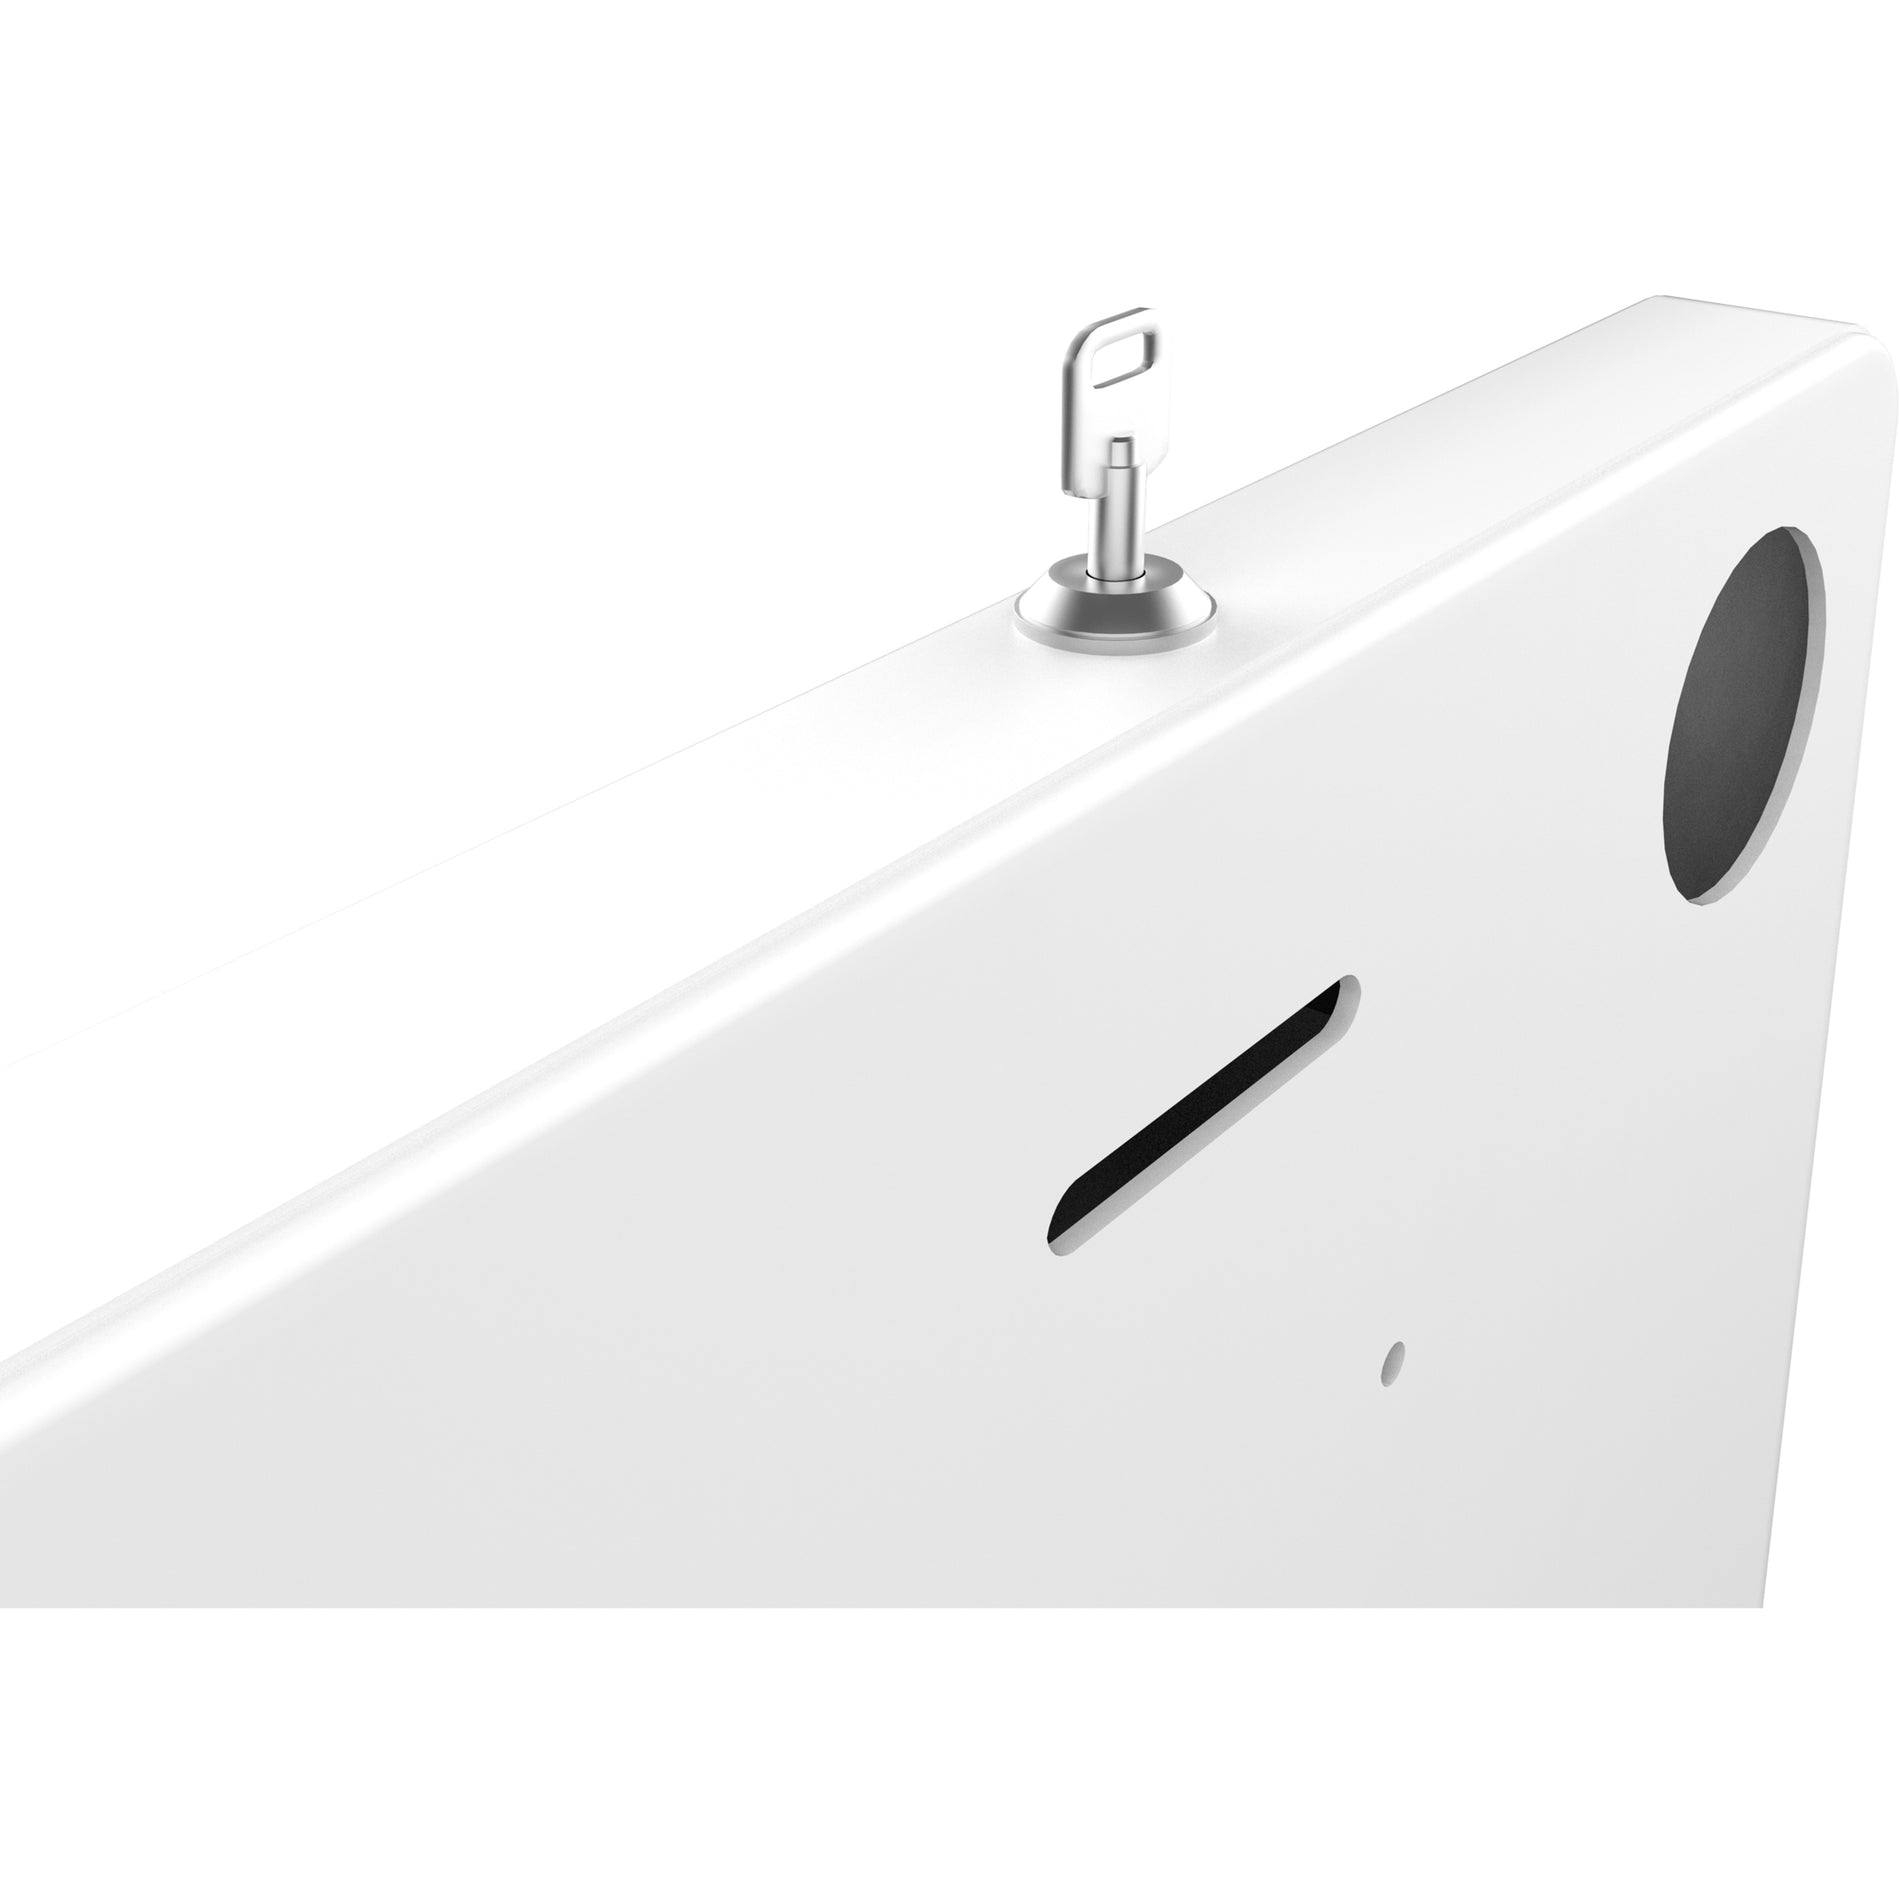 CTA Digital PAD-PSWW Premium Small Locking Wall Mount (White), Theft Resistant, Lockable, Heavy Duty, Cable Management